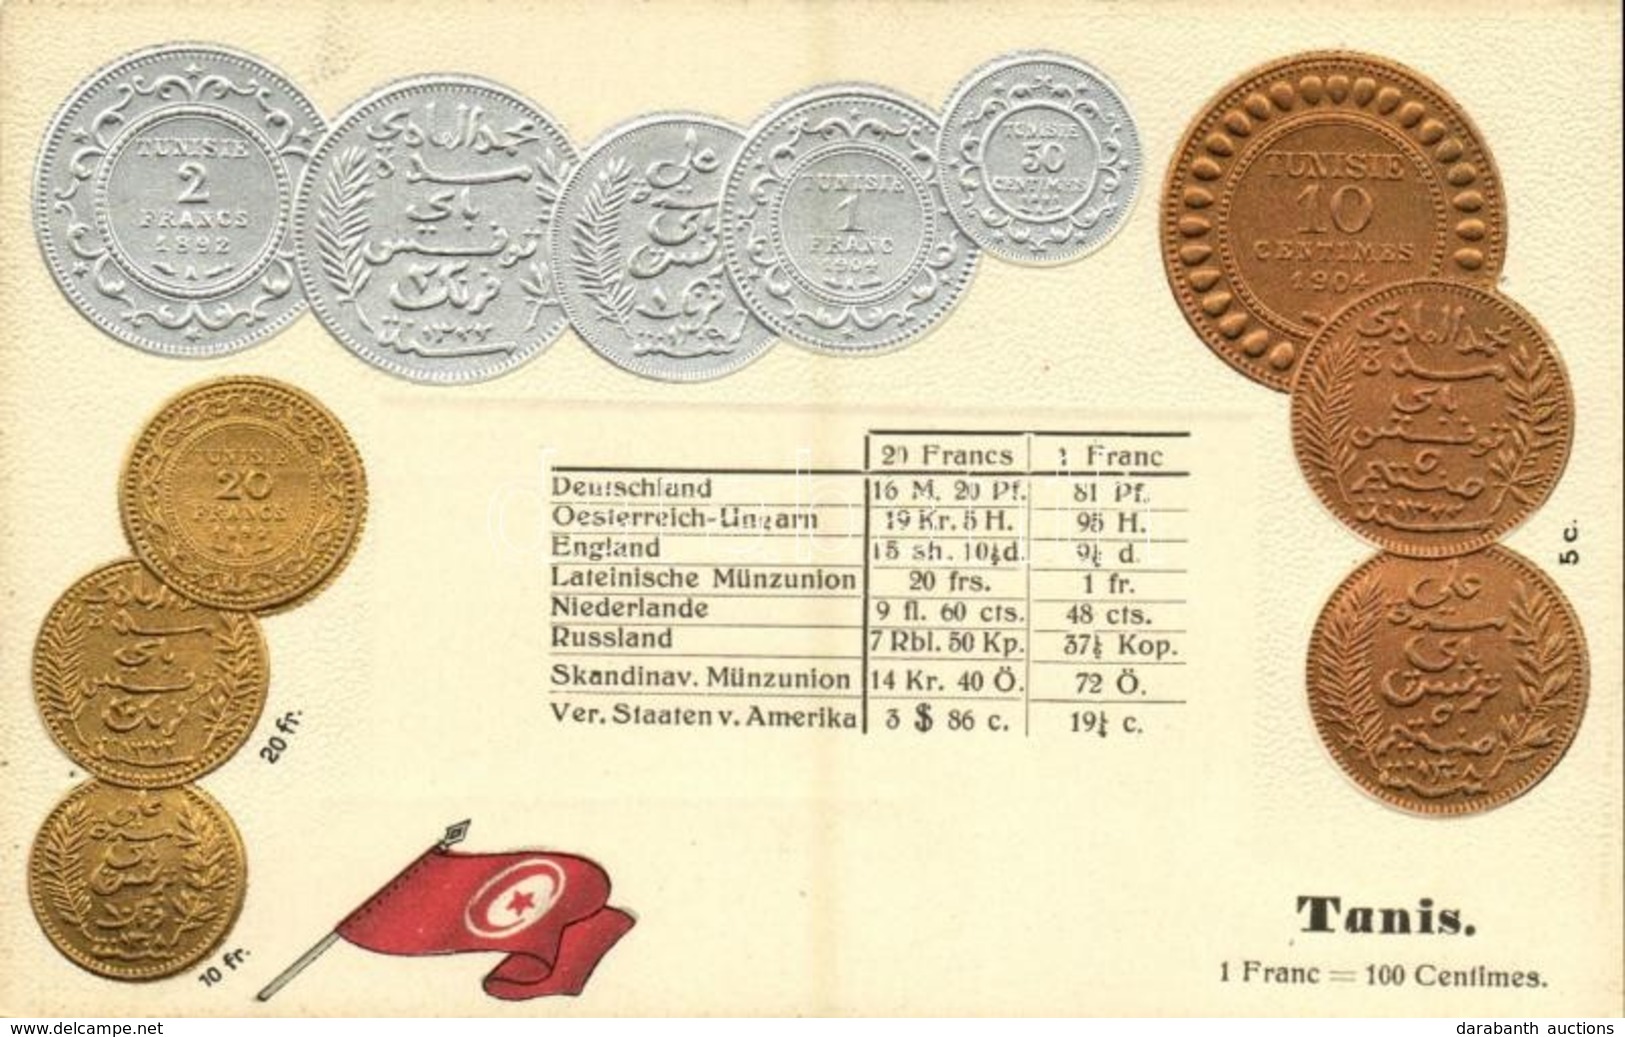 ** T2/T3 Tunisie / Coins And Flag Of Tunis. M. H. Berlin-Schbg. Emb. Litho (pinhole) - Unclassified